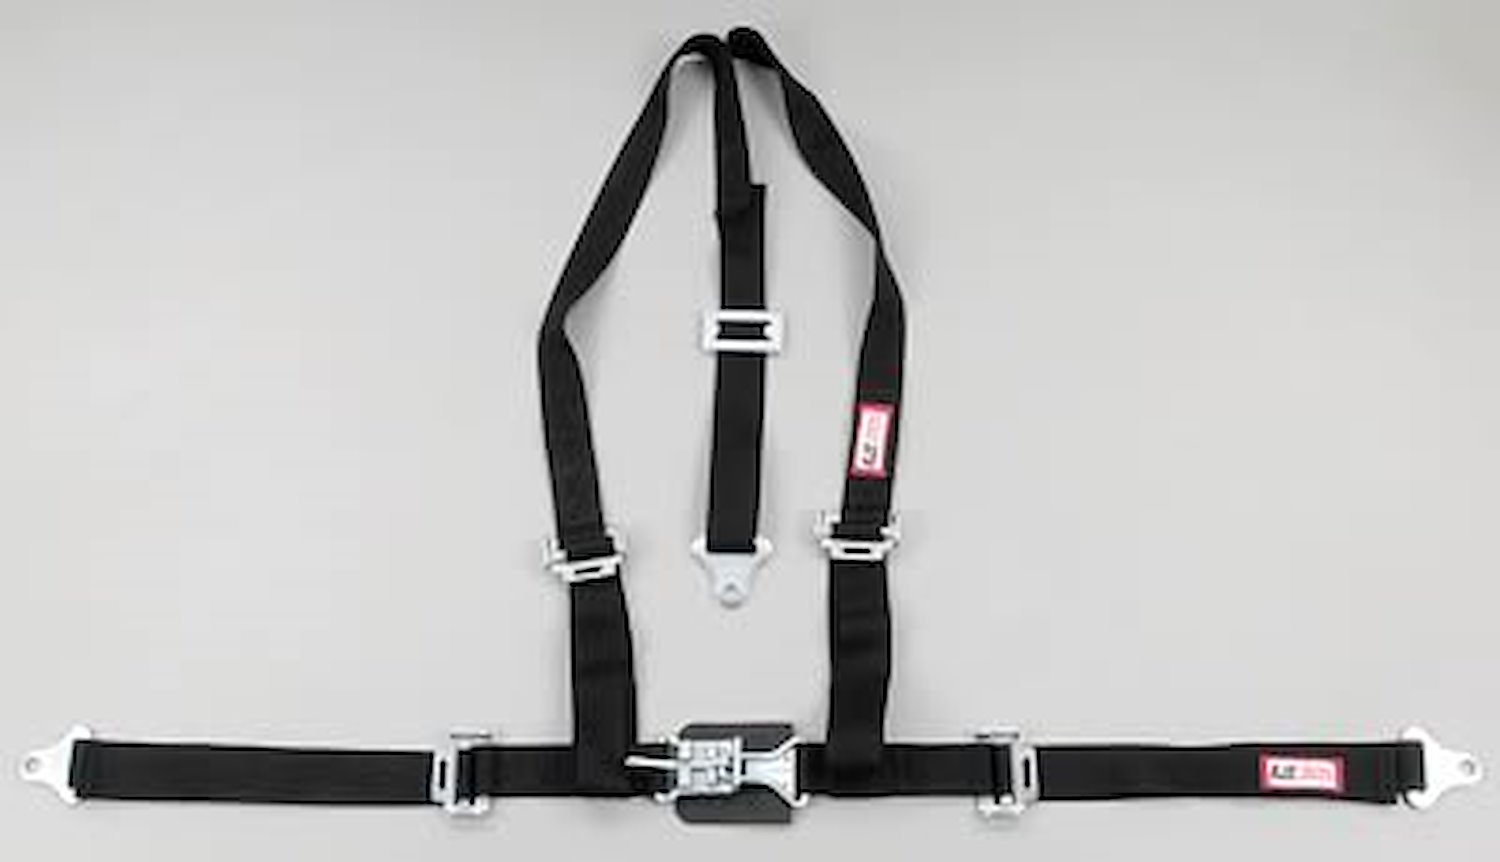 NON-SFI L&L HARNESS 2 PULL DOWN Lap Belt SNAP SEWN IN 2 S.H. INDIVIDUAL FLOOR Mount w/STERNUM STRAP WRAP/SNAP BLUE